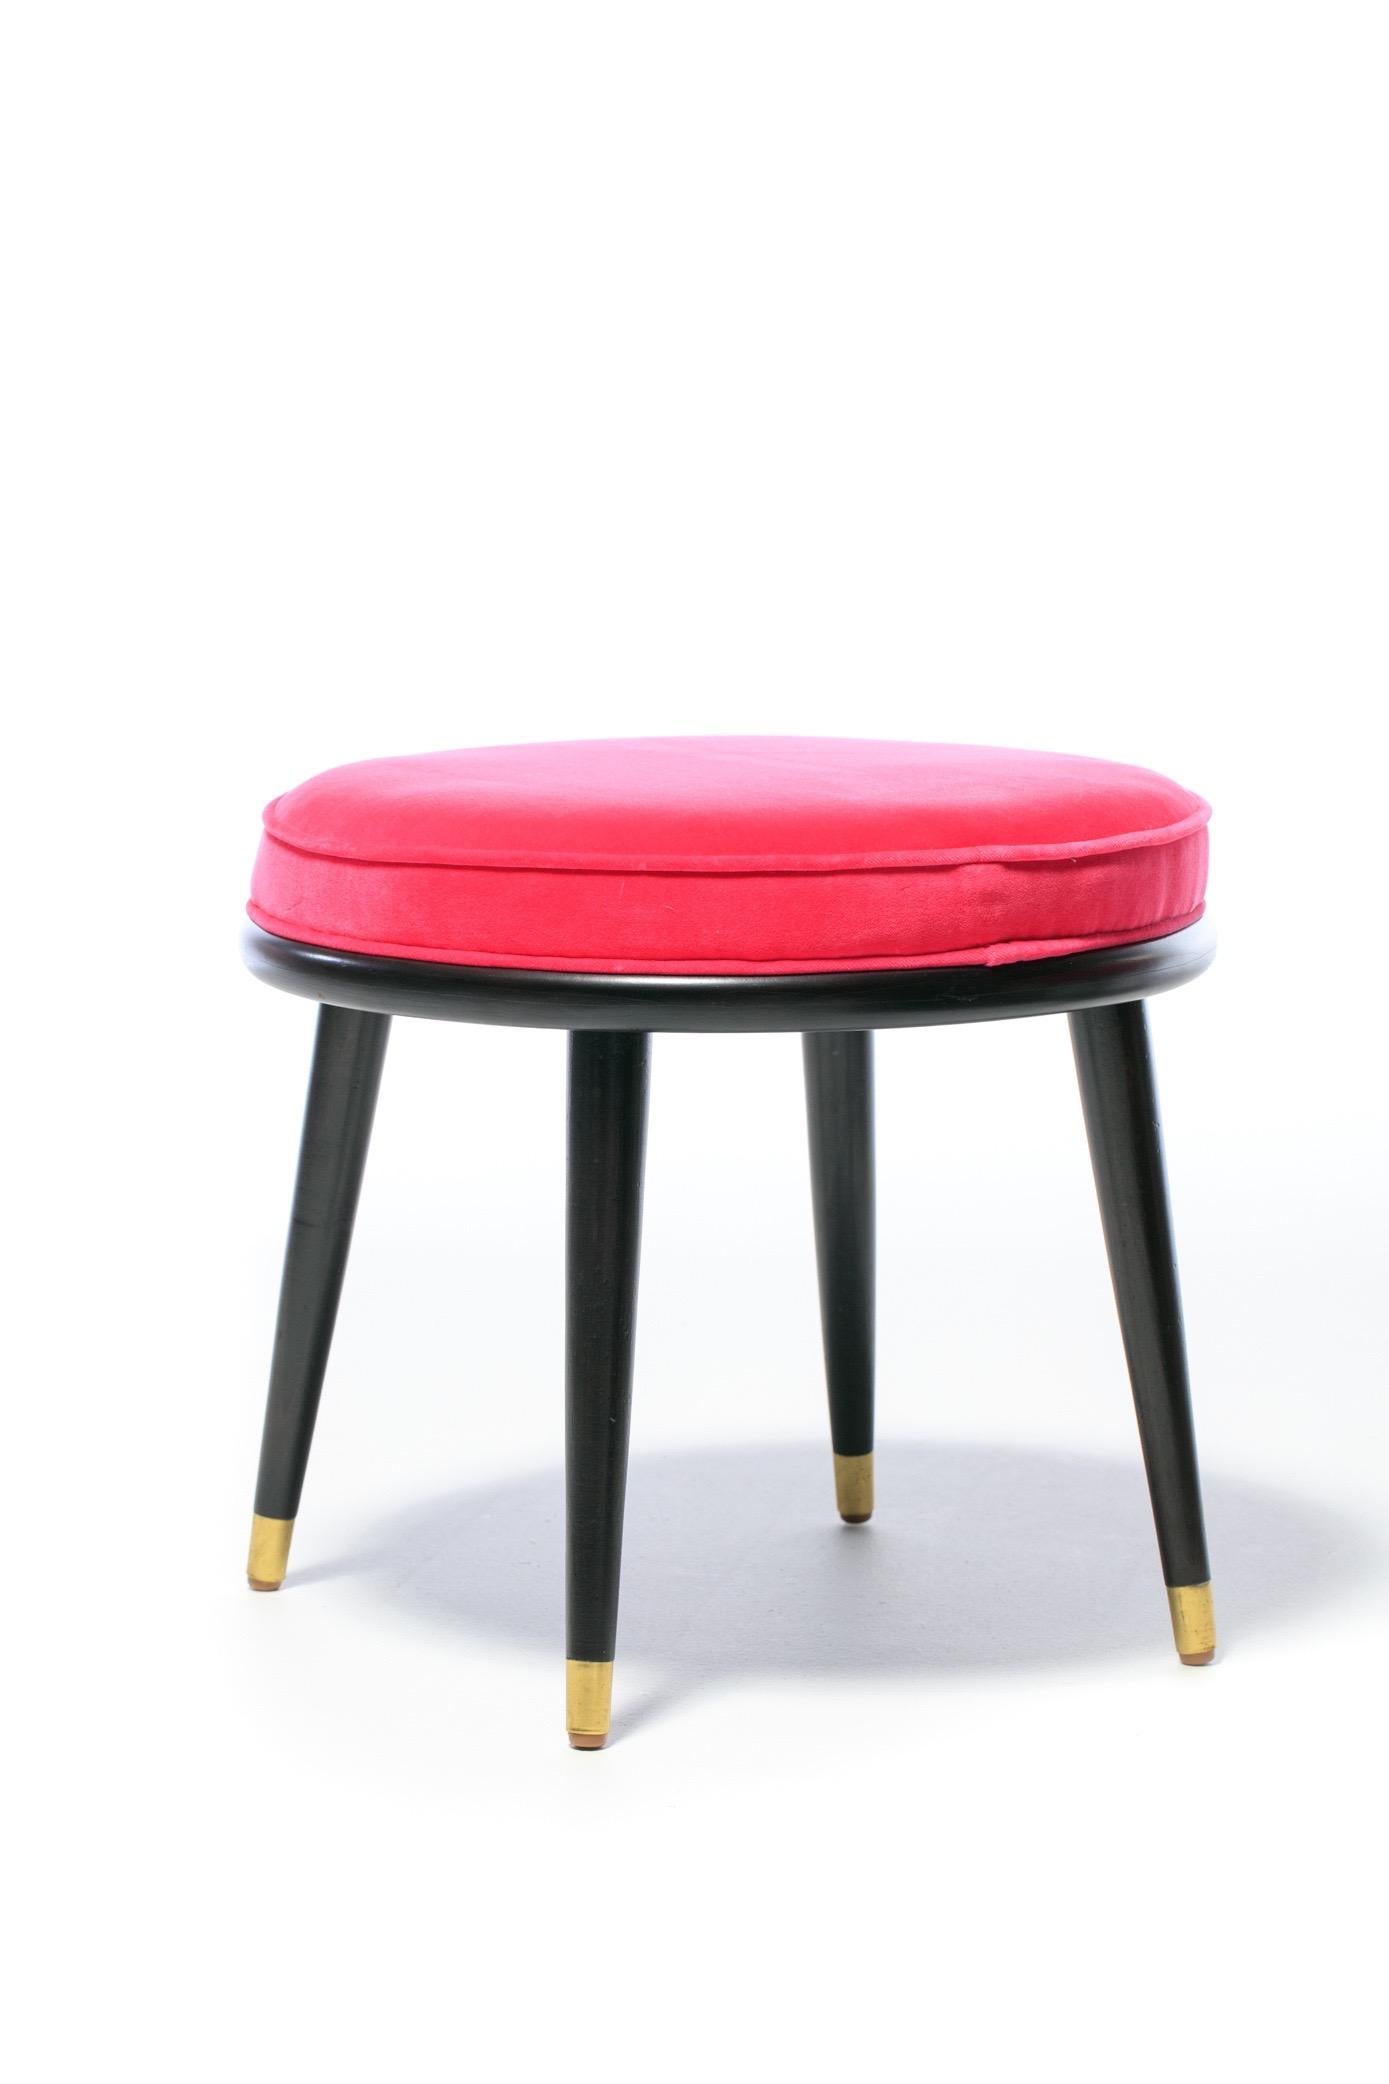 Pair of Mid Century Stools with Schiaparelli Pink Velvet Seats & Brass Sabots For Sale 2